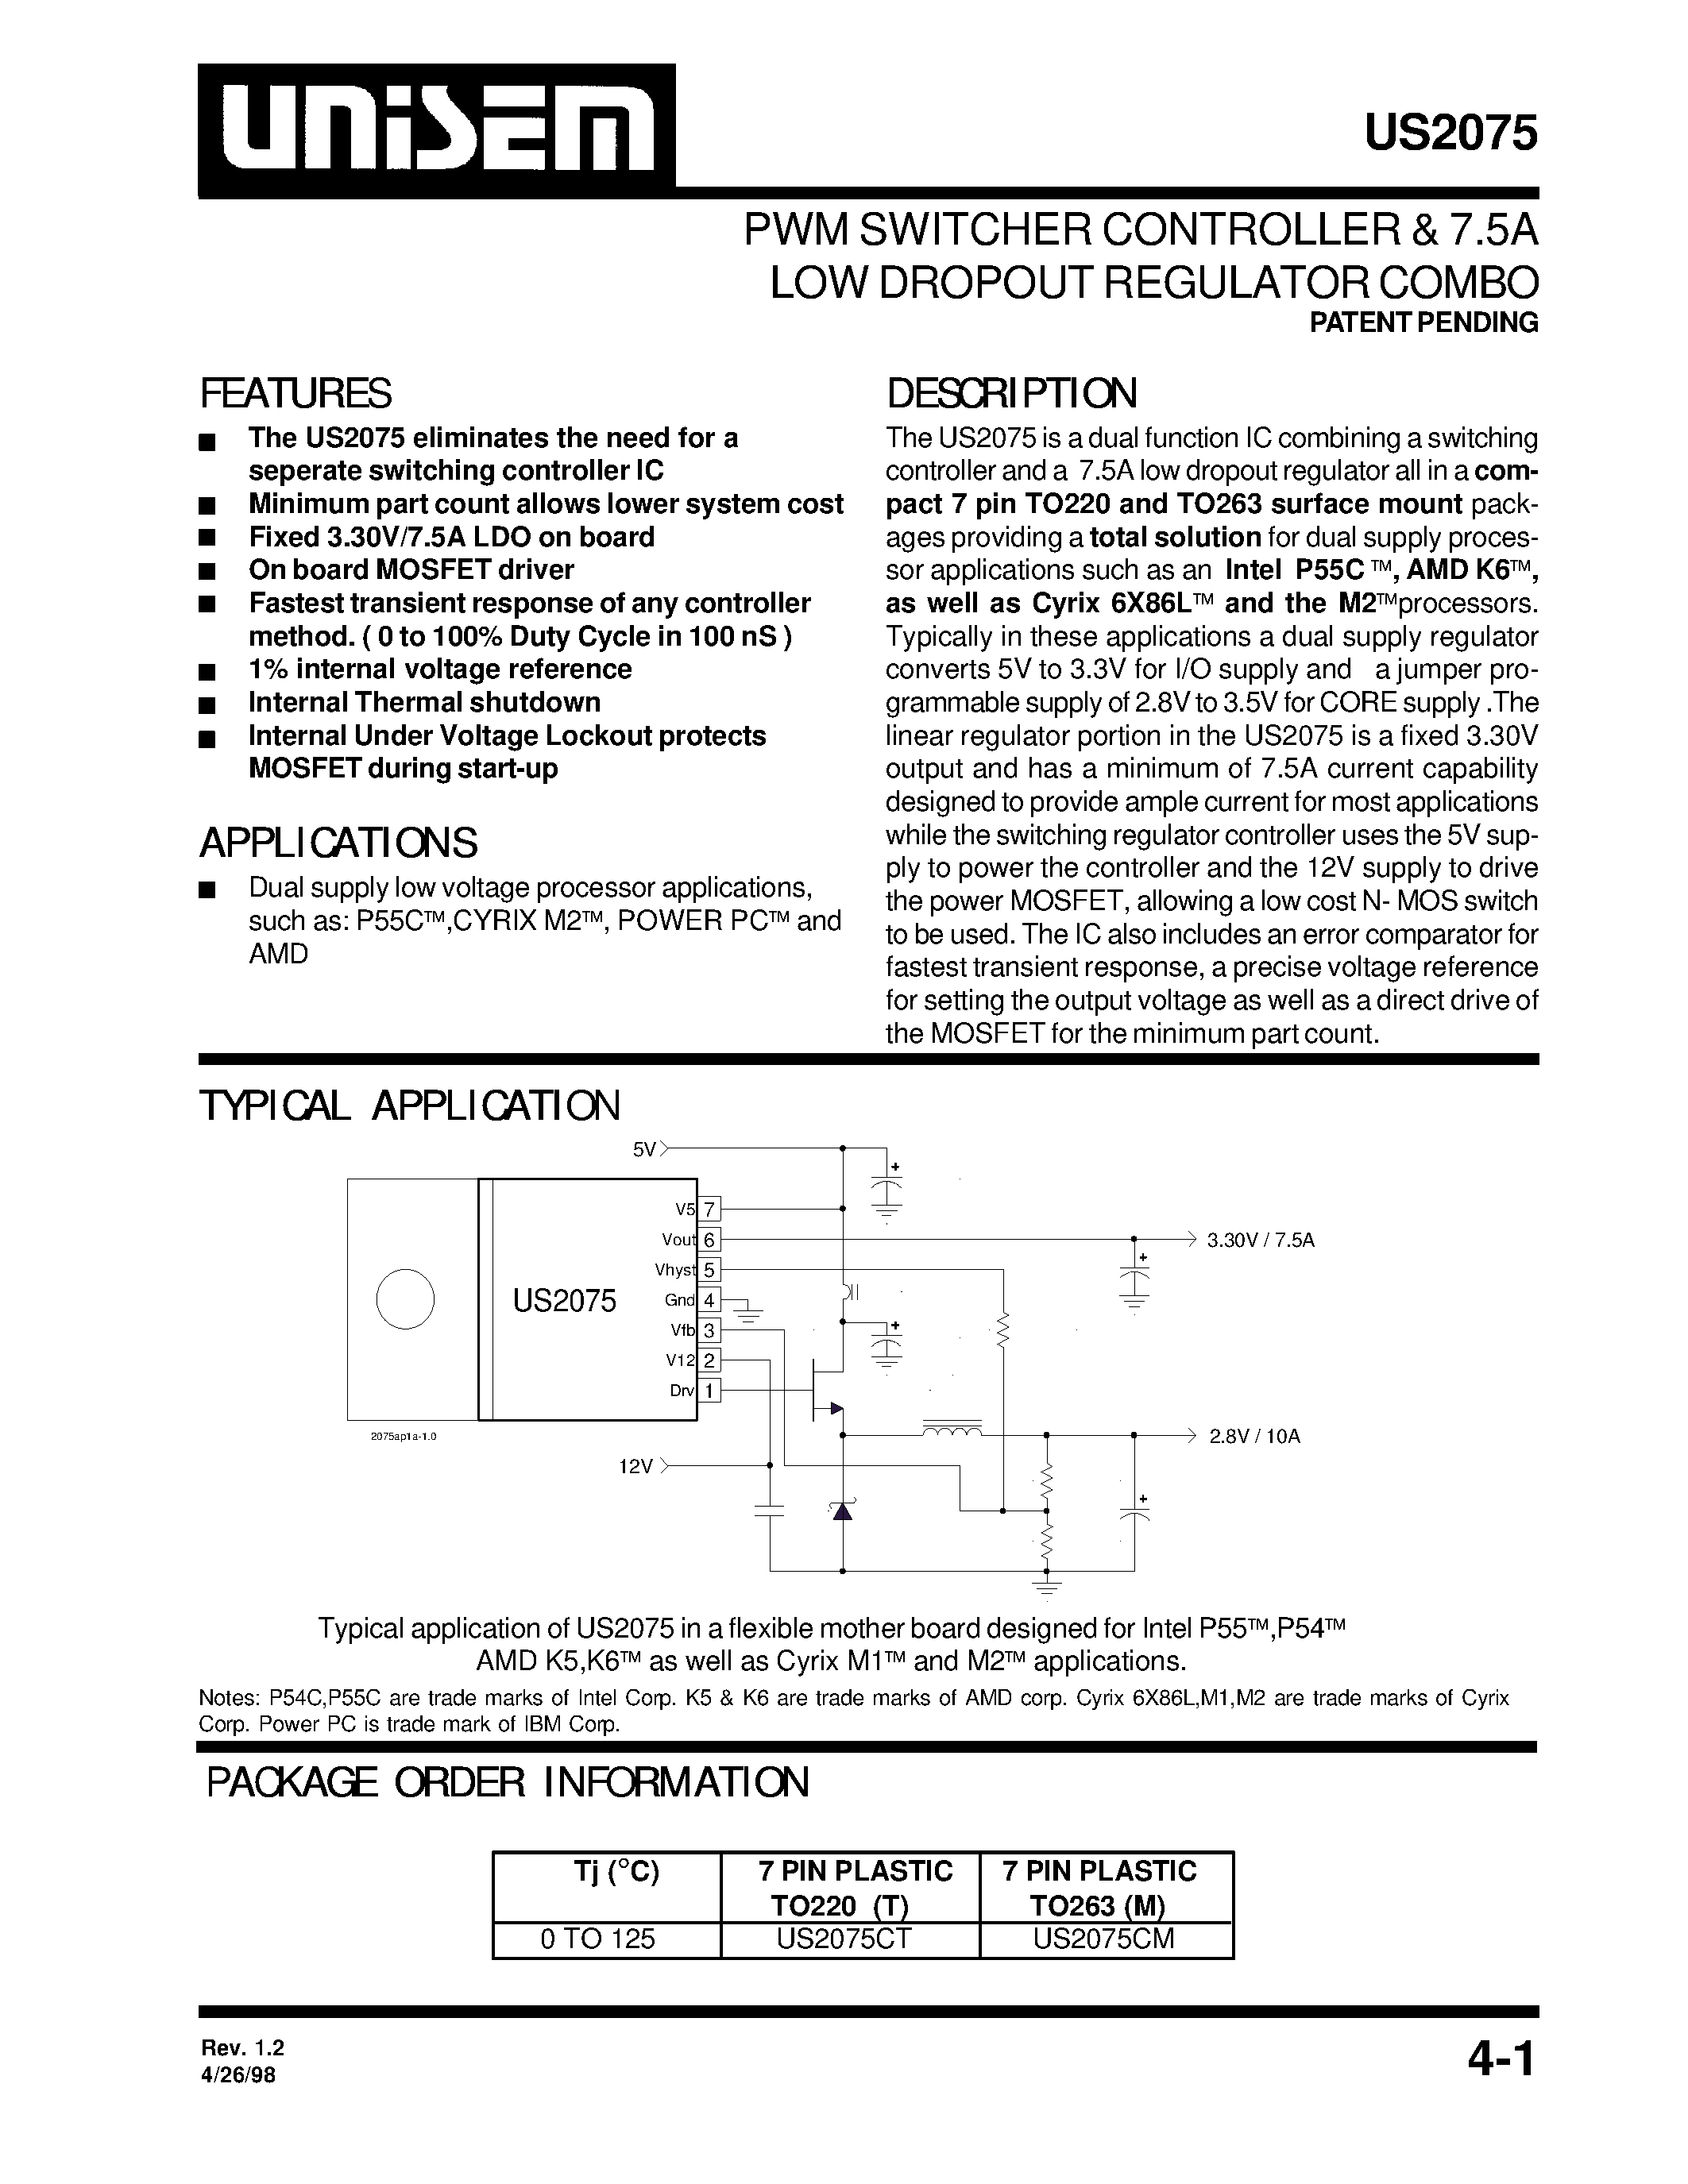 Datasheet US2075 - PWM SWITCHER CONTROLLER & 7.5A LOW DROPOUT REGULATOR COMBO page 1